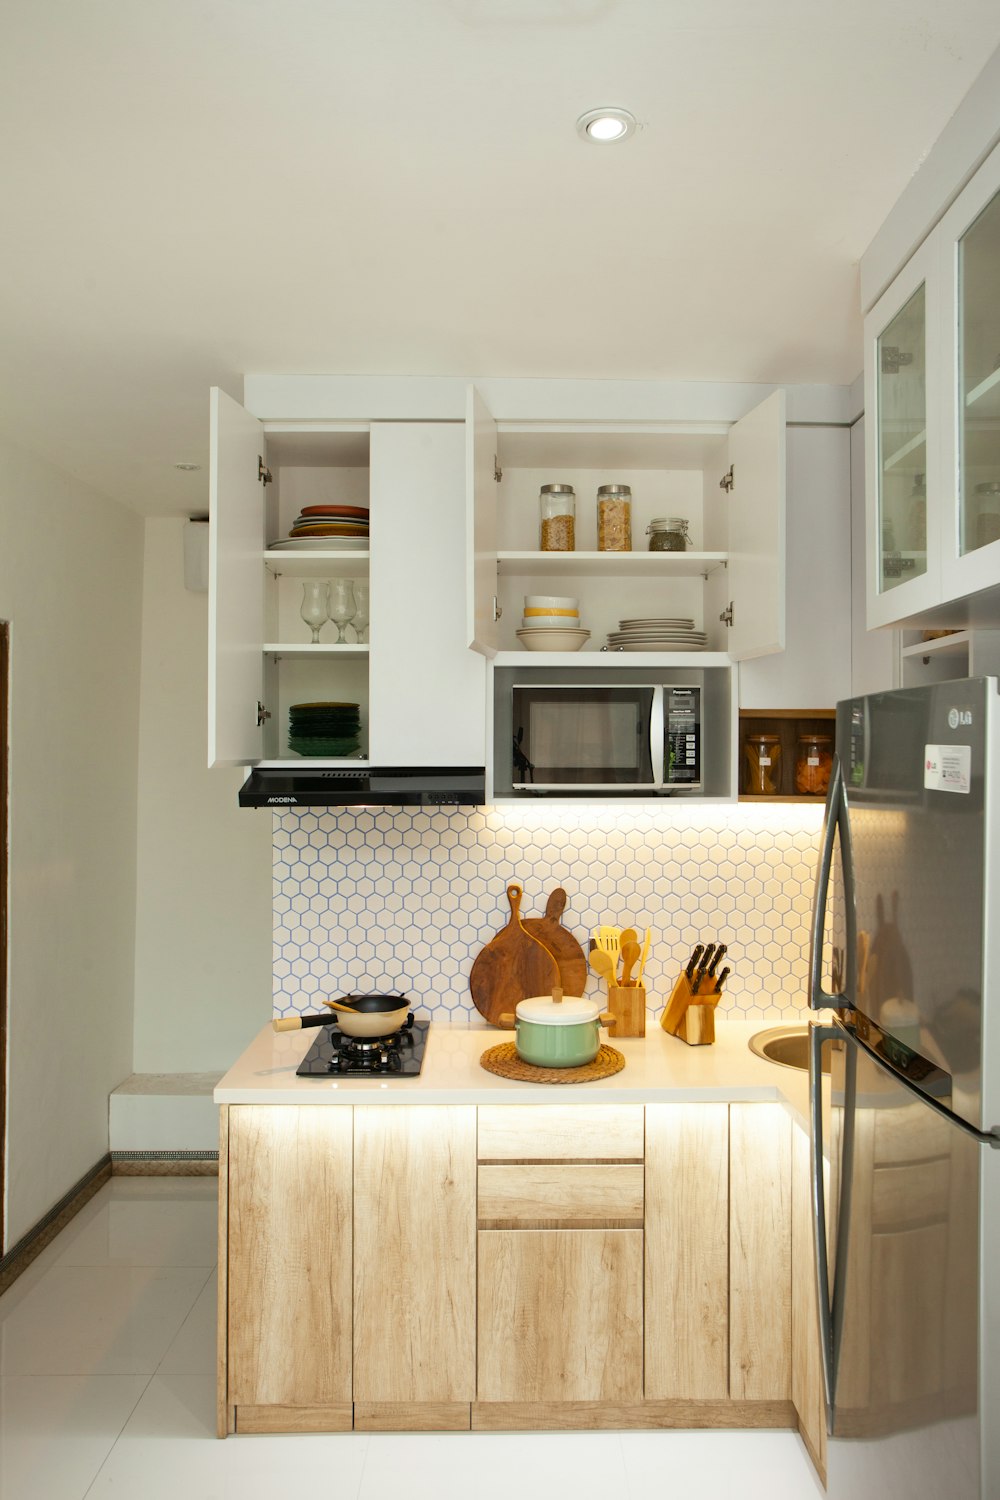 a kitchen with a refrigerator, stove, microwave, and cabinets